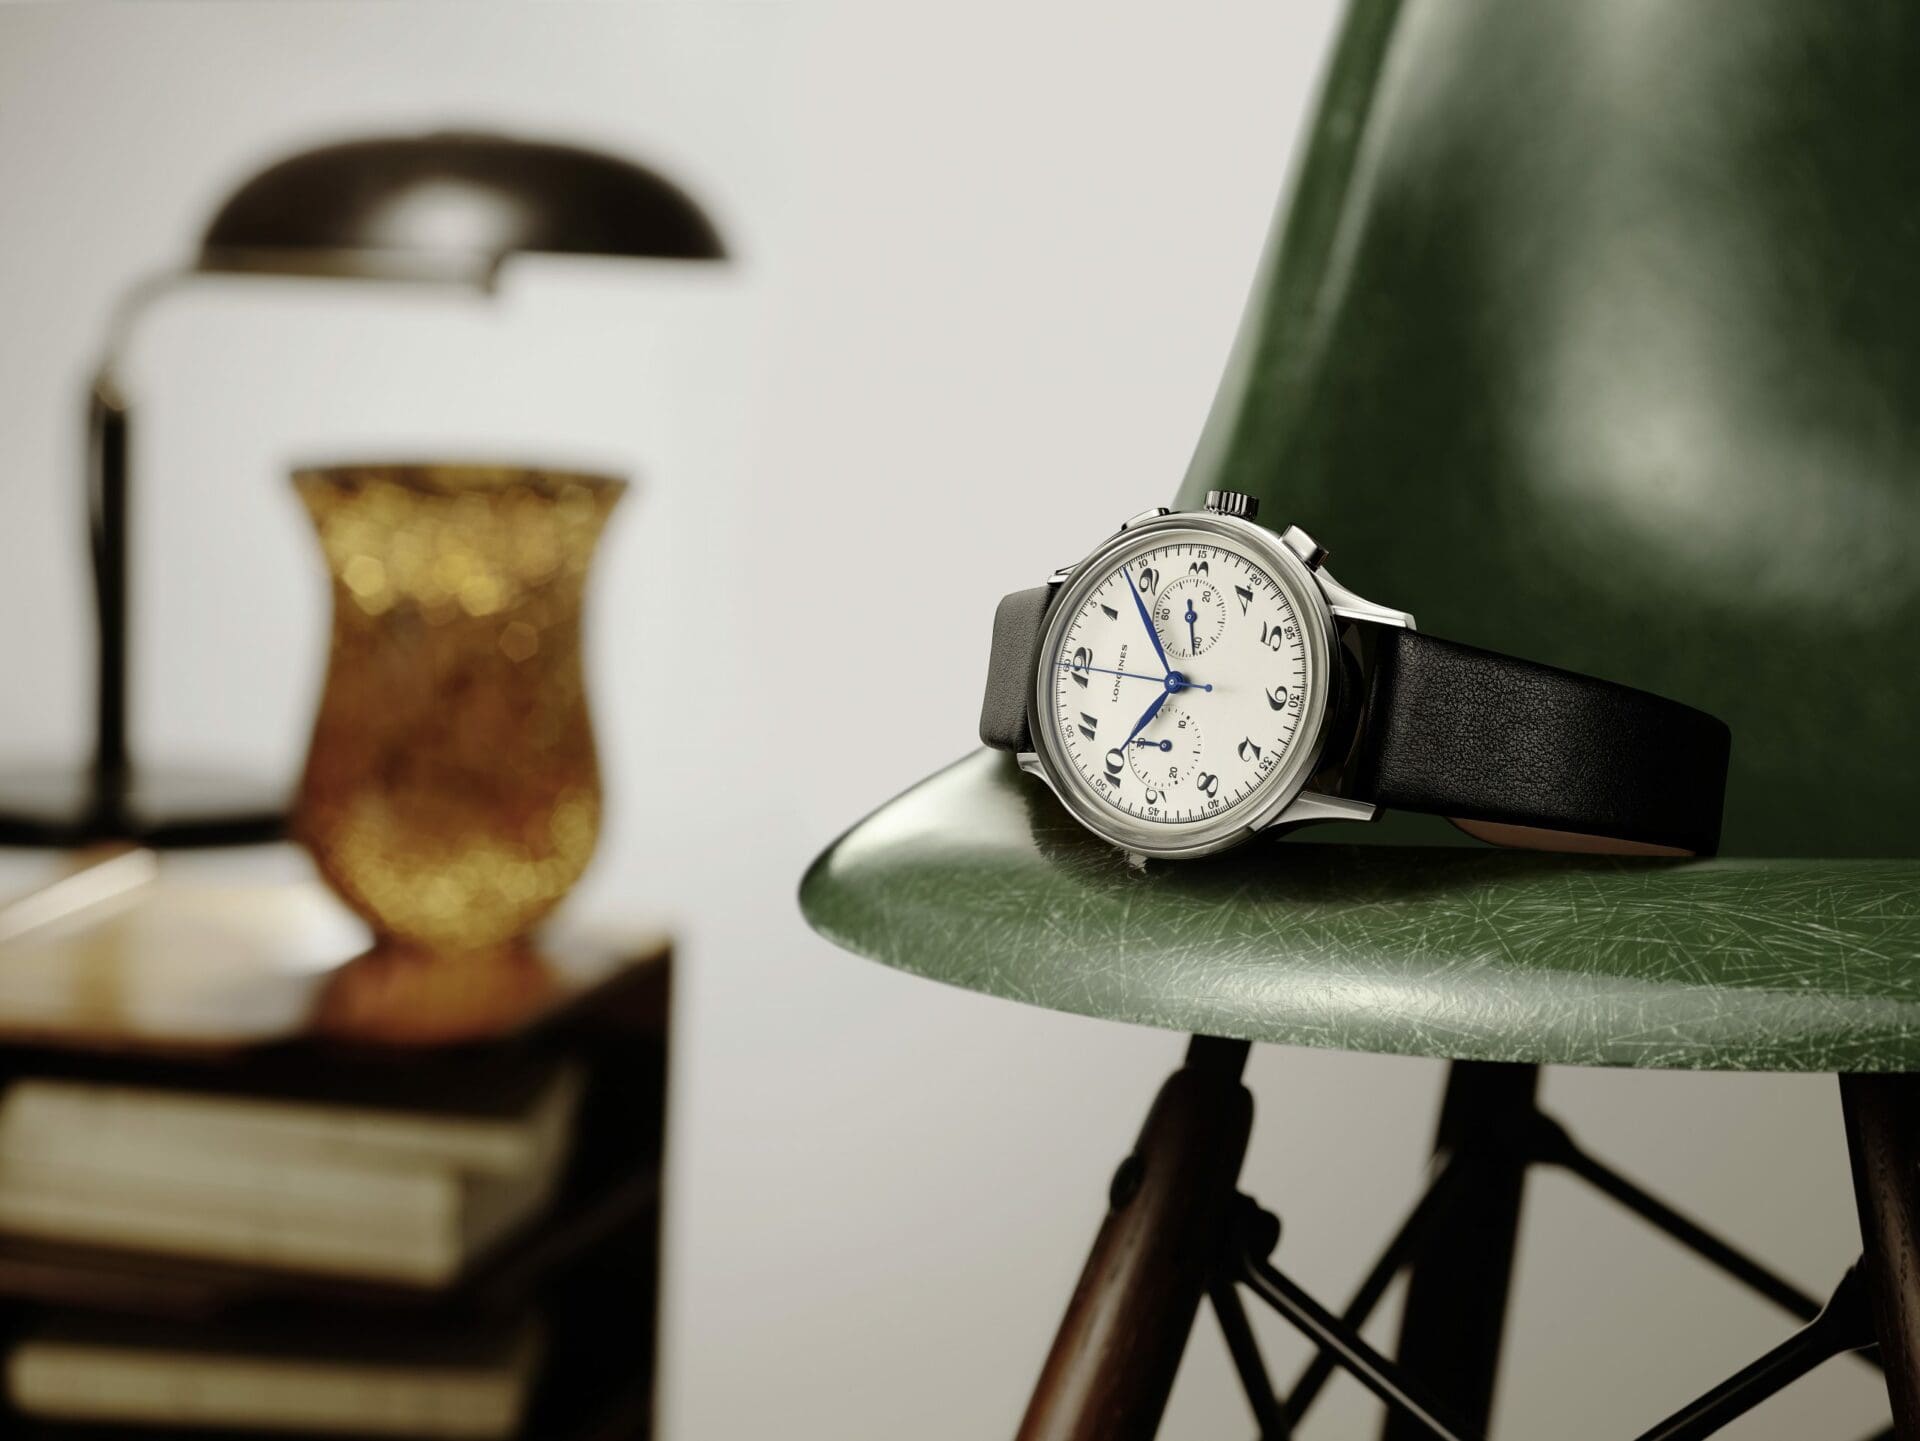 INTRODUCING: The Longines Heritage Classic Chronograph 1946